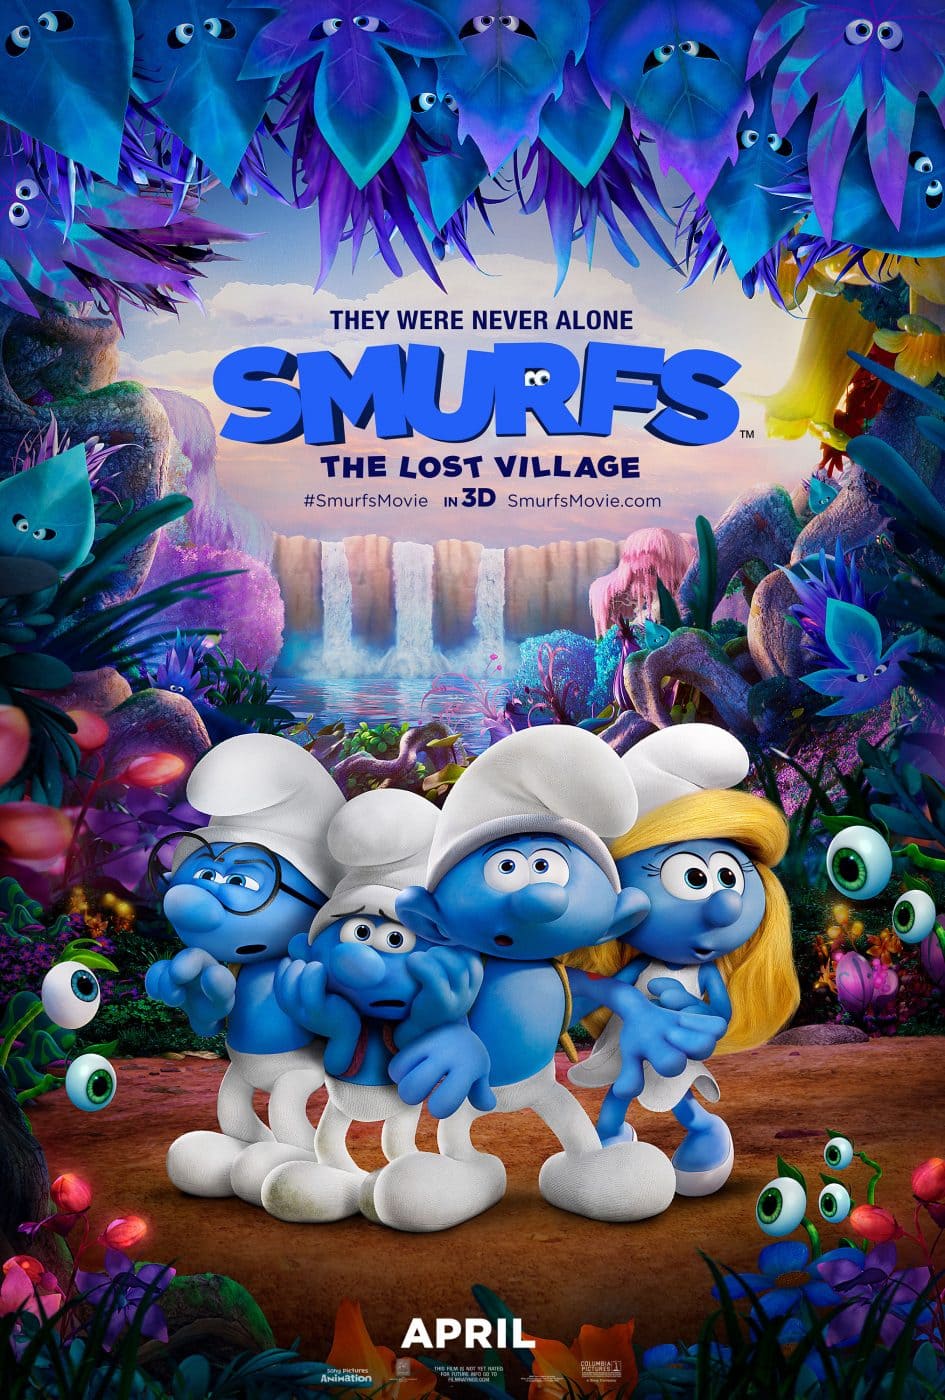 http://thereviewwire.com/wp-content/uploads/2017/02/SMURFS-THE-LOST-VILLAGE_ONE-SHEET.jpg